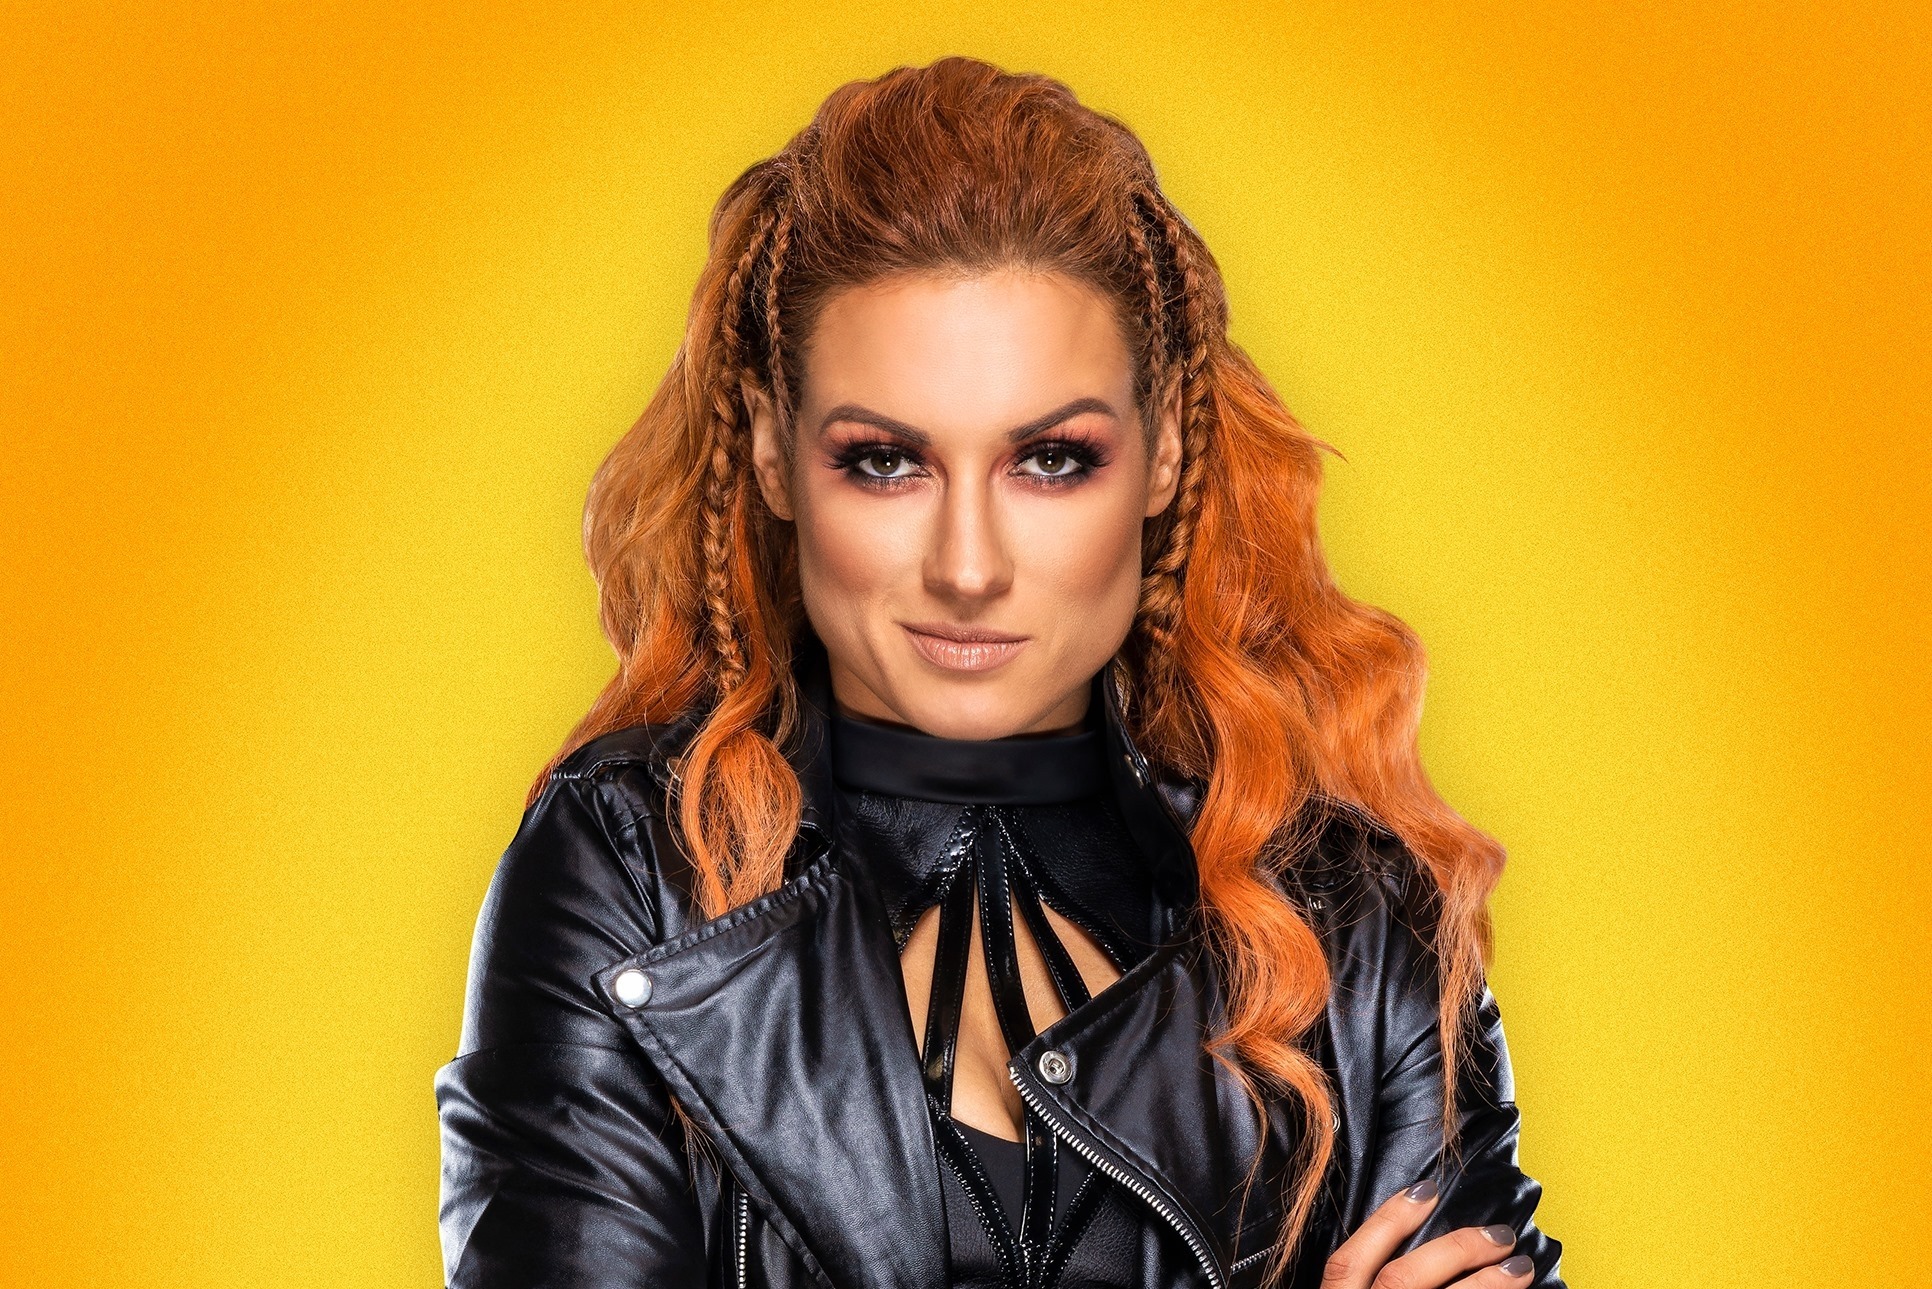 WWE's Becky Lynch wants to spotlight NXT brand, elevate young stars